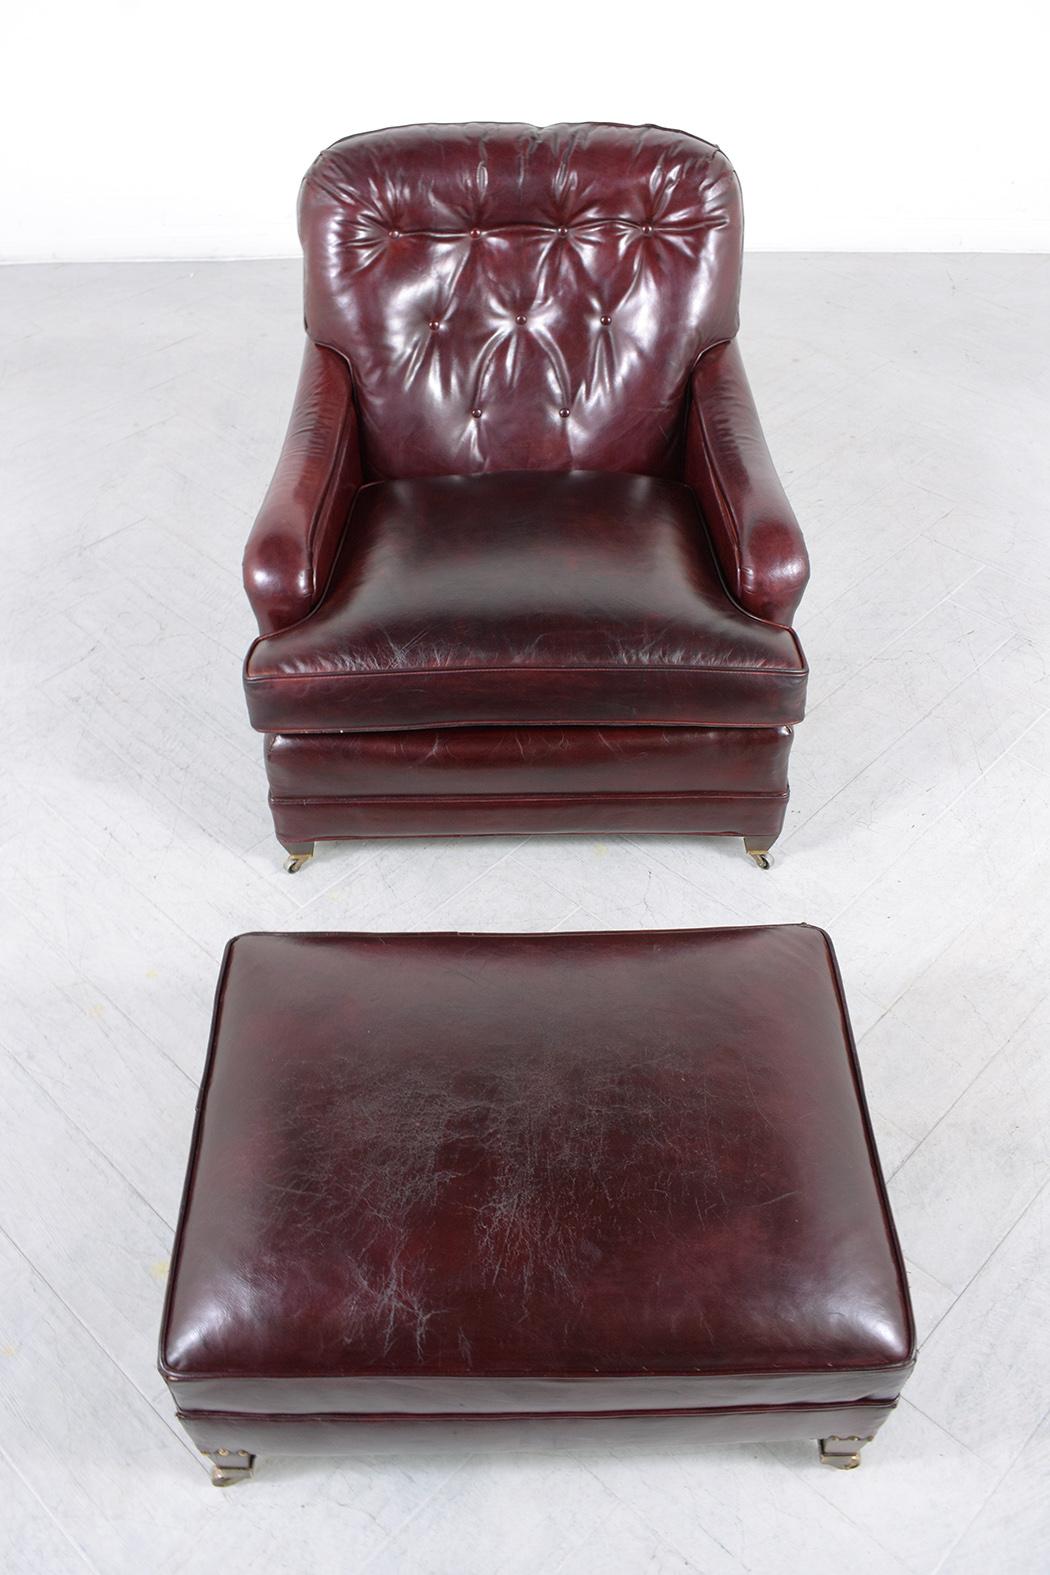 Step into the luxurious world of the early 20th century with our Antique English Chesterfield Lounge Chair, a symbol of timeless elegance and superior craftsmanship. This exquisite chair, handcrafted by skilled artisans, is upholstered in premium